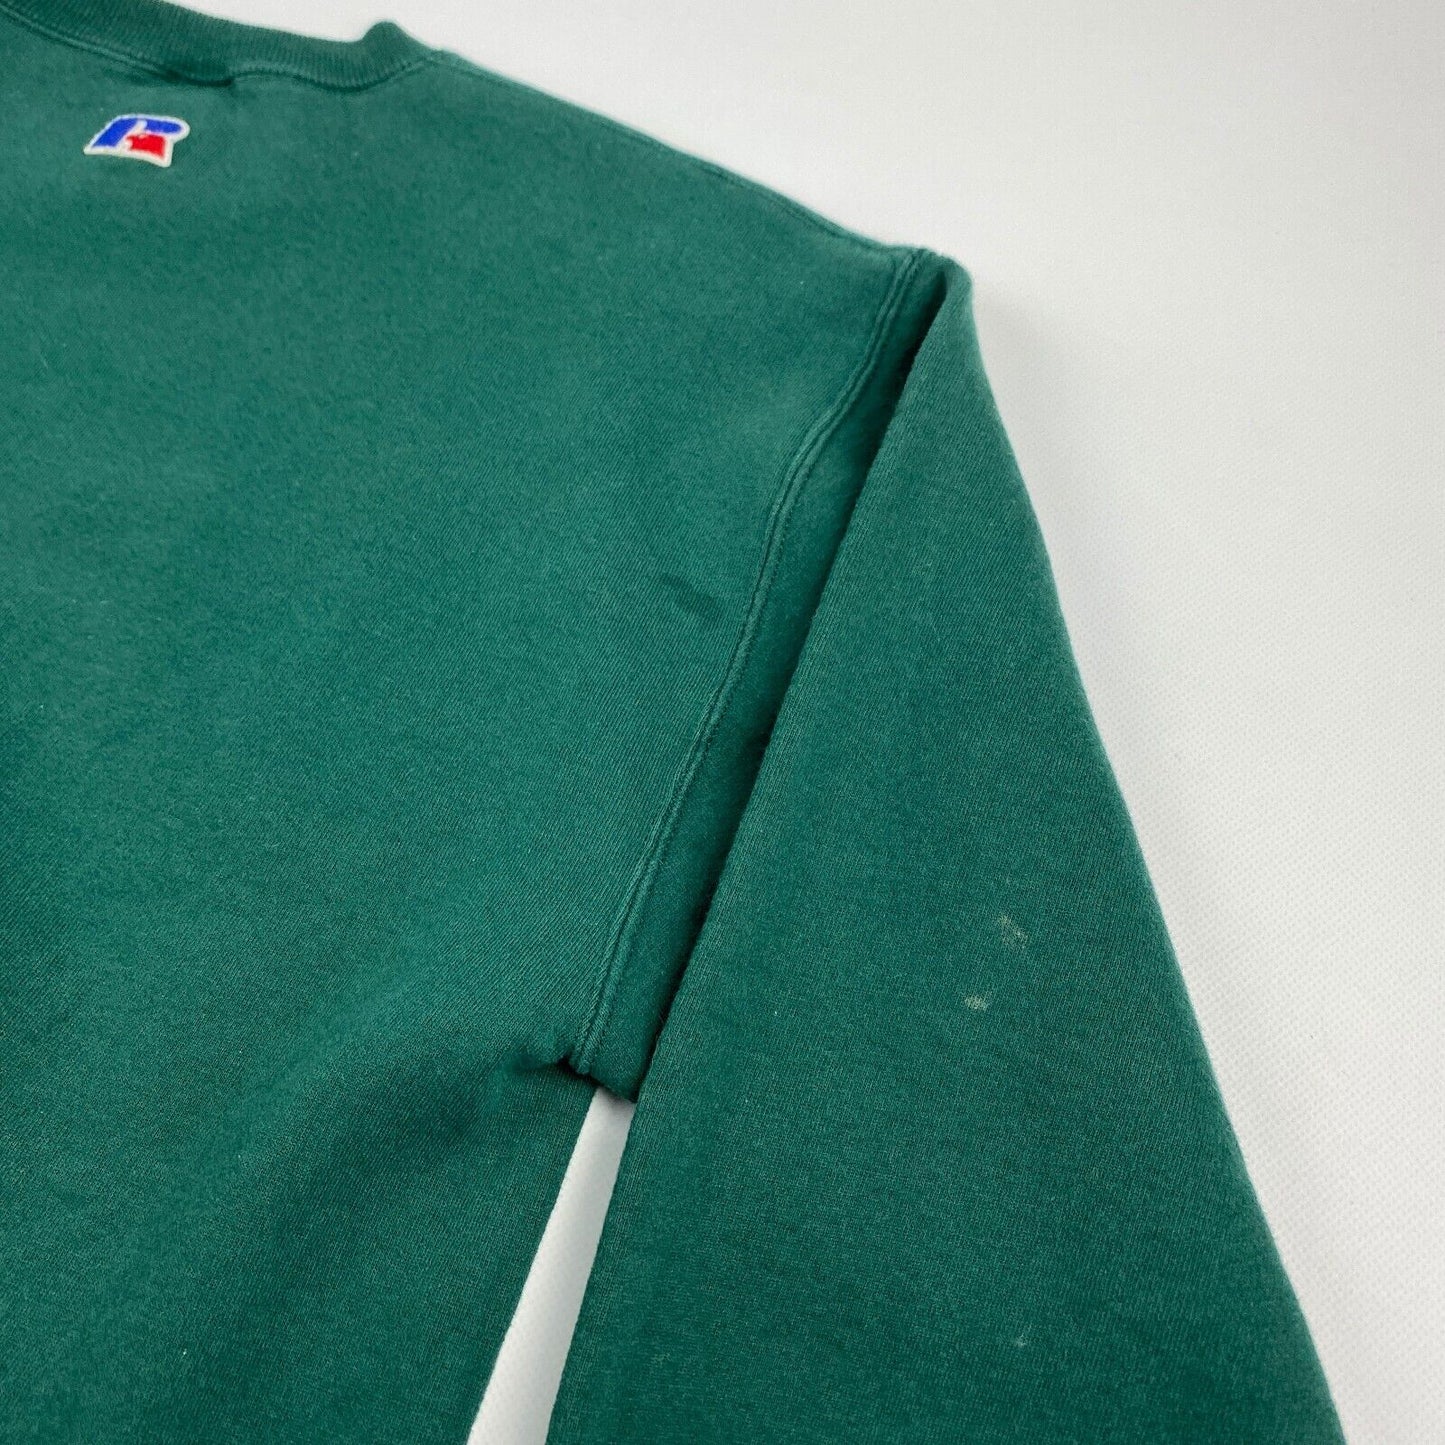 VINTAGE 90s Russell Athletic Blank Green Crewneck Sweater sz Large Men MadeinUSA